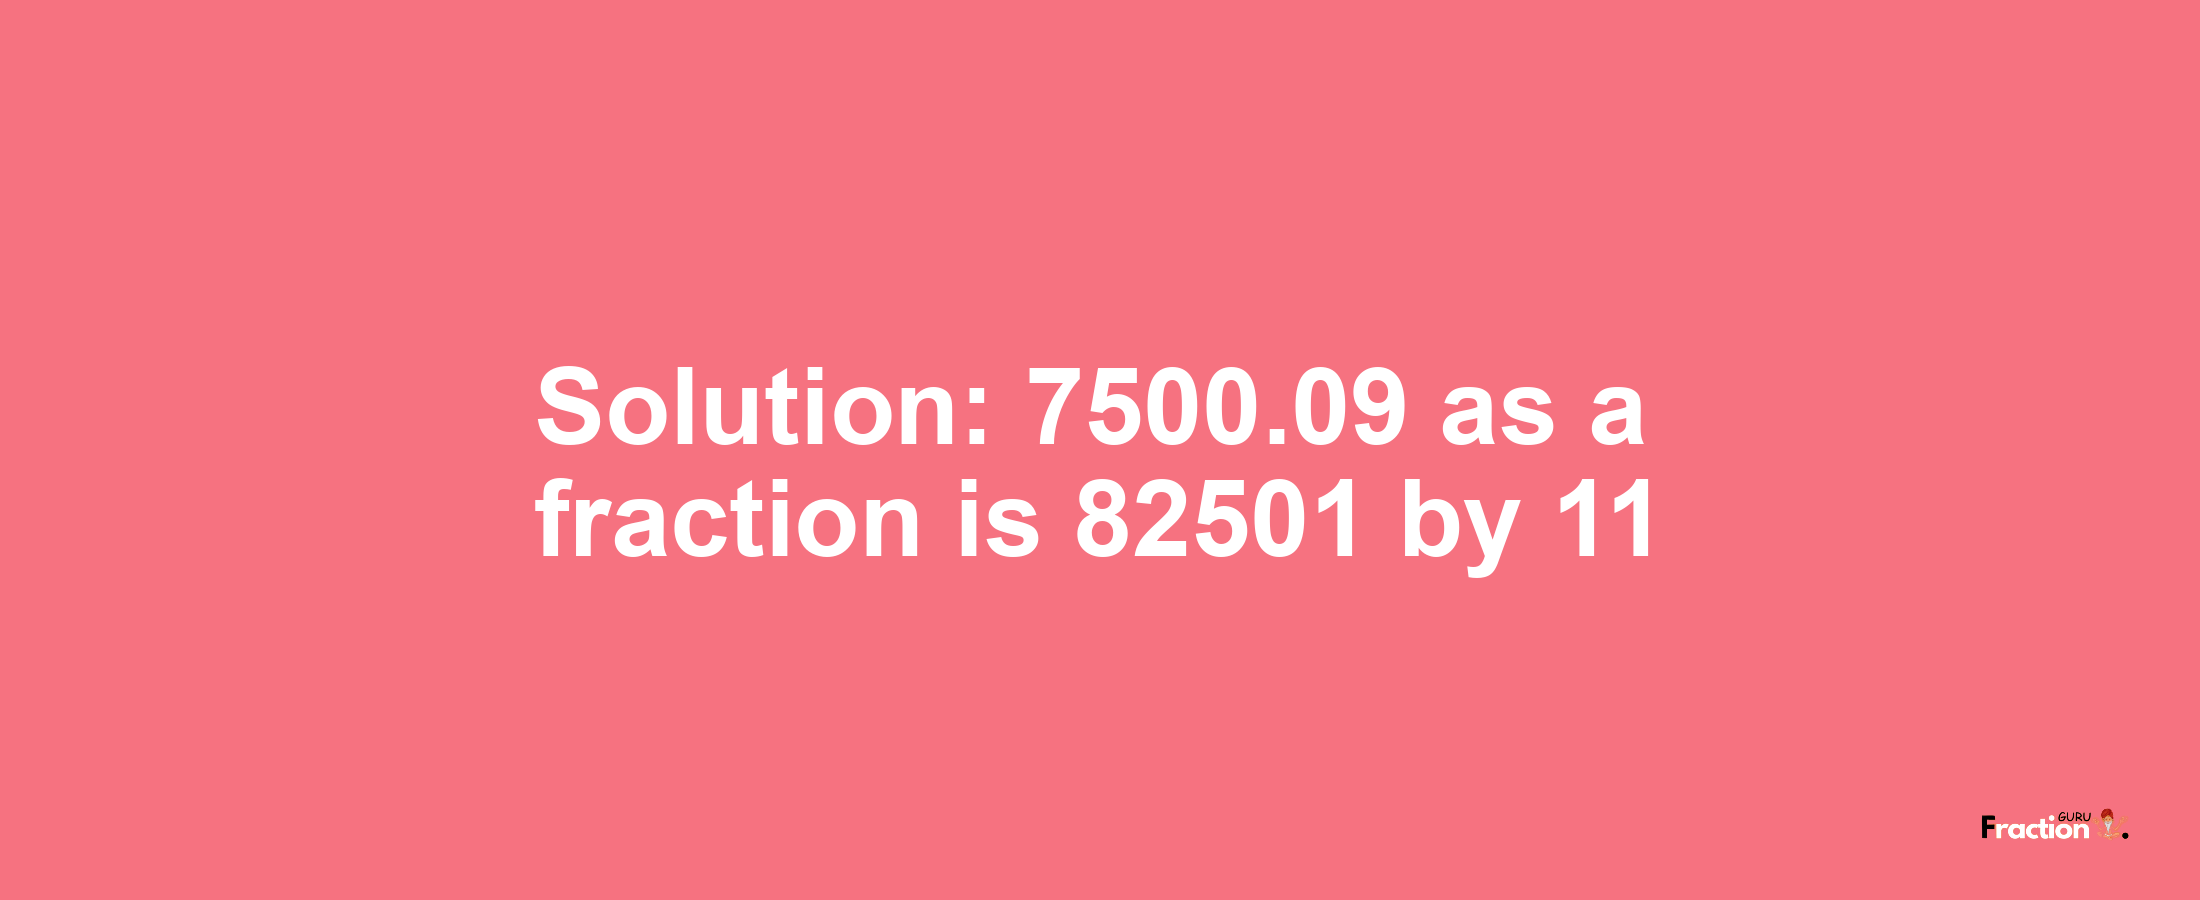 Solution:7500.09 as a fraction is 82501/11